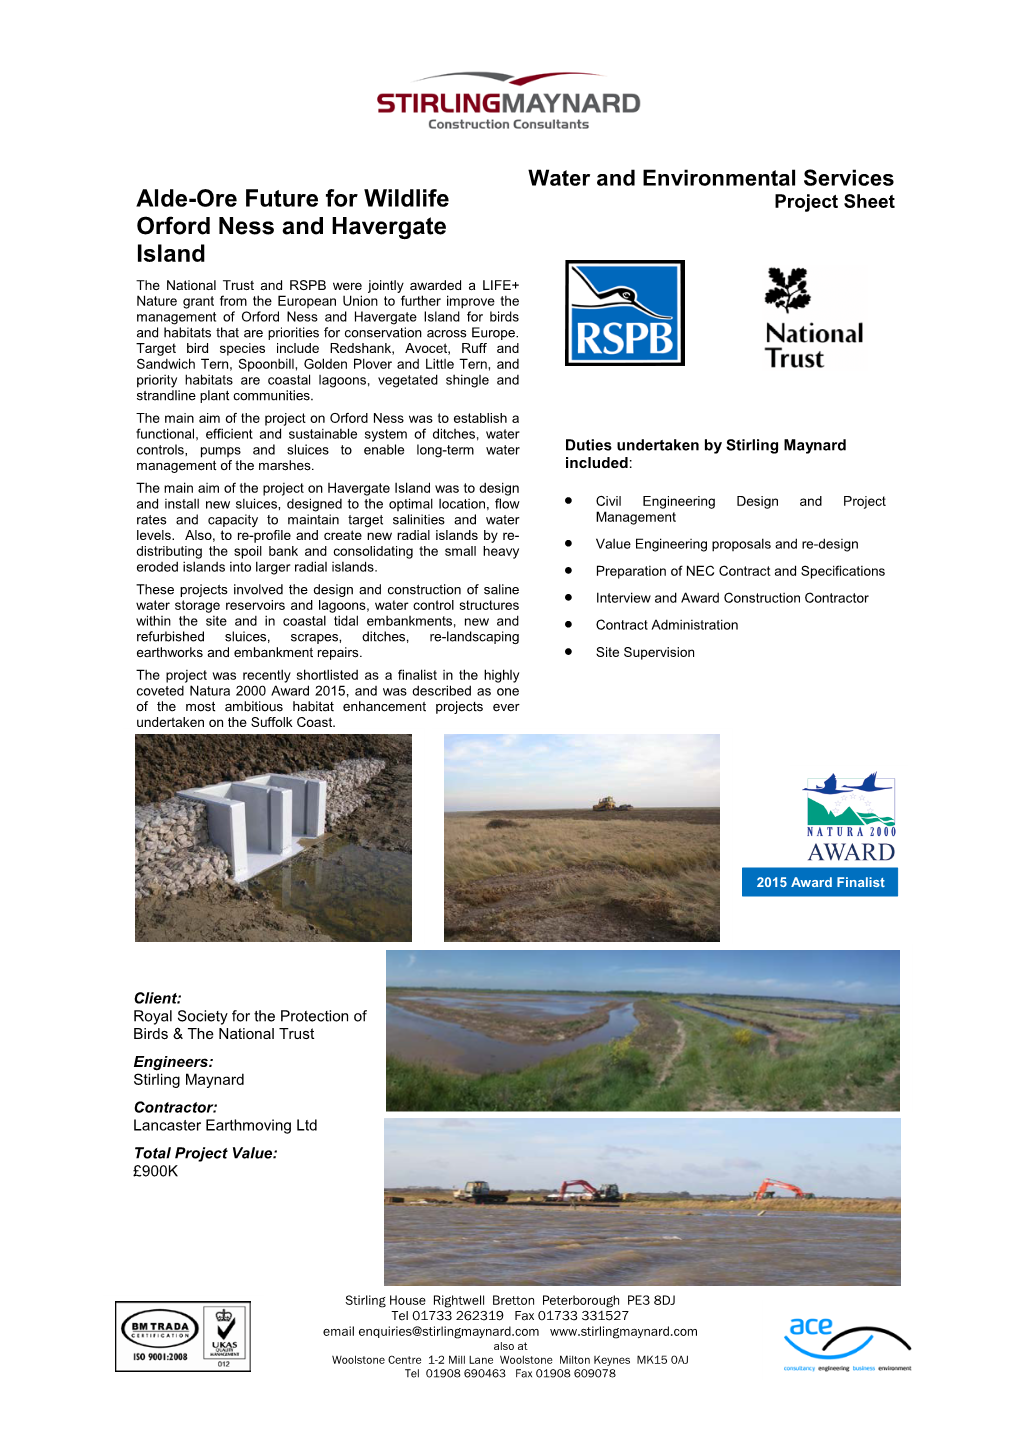 Alde-Ore Future for Wildlife Orford Ness and Havergate Island